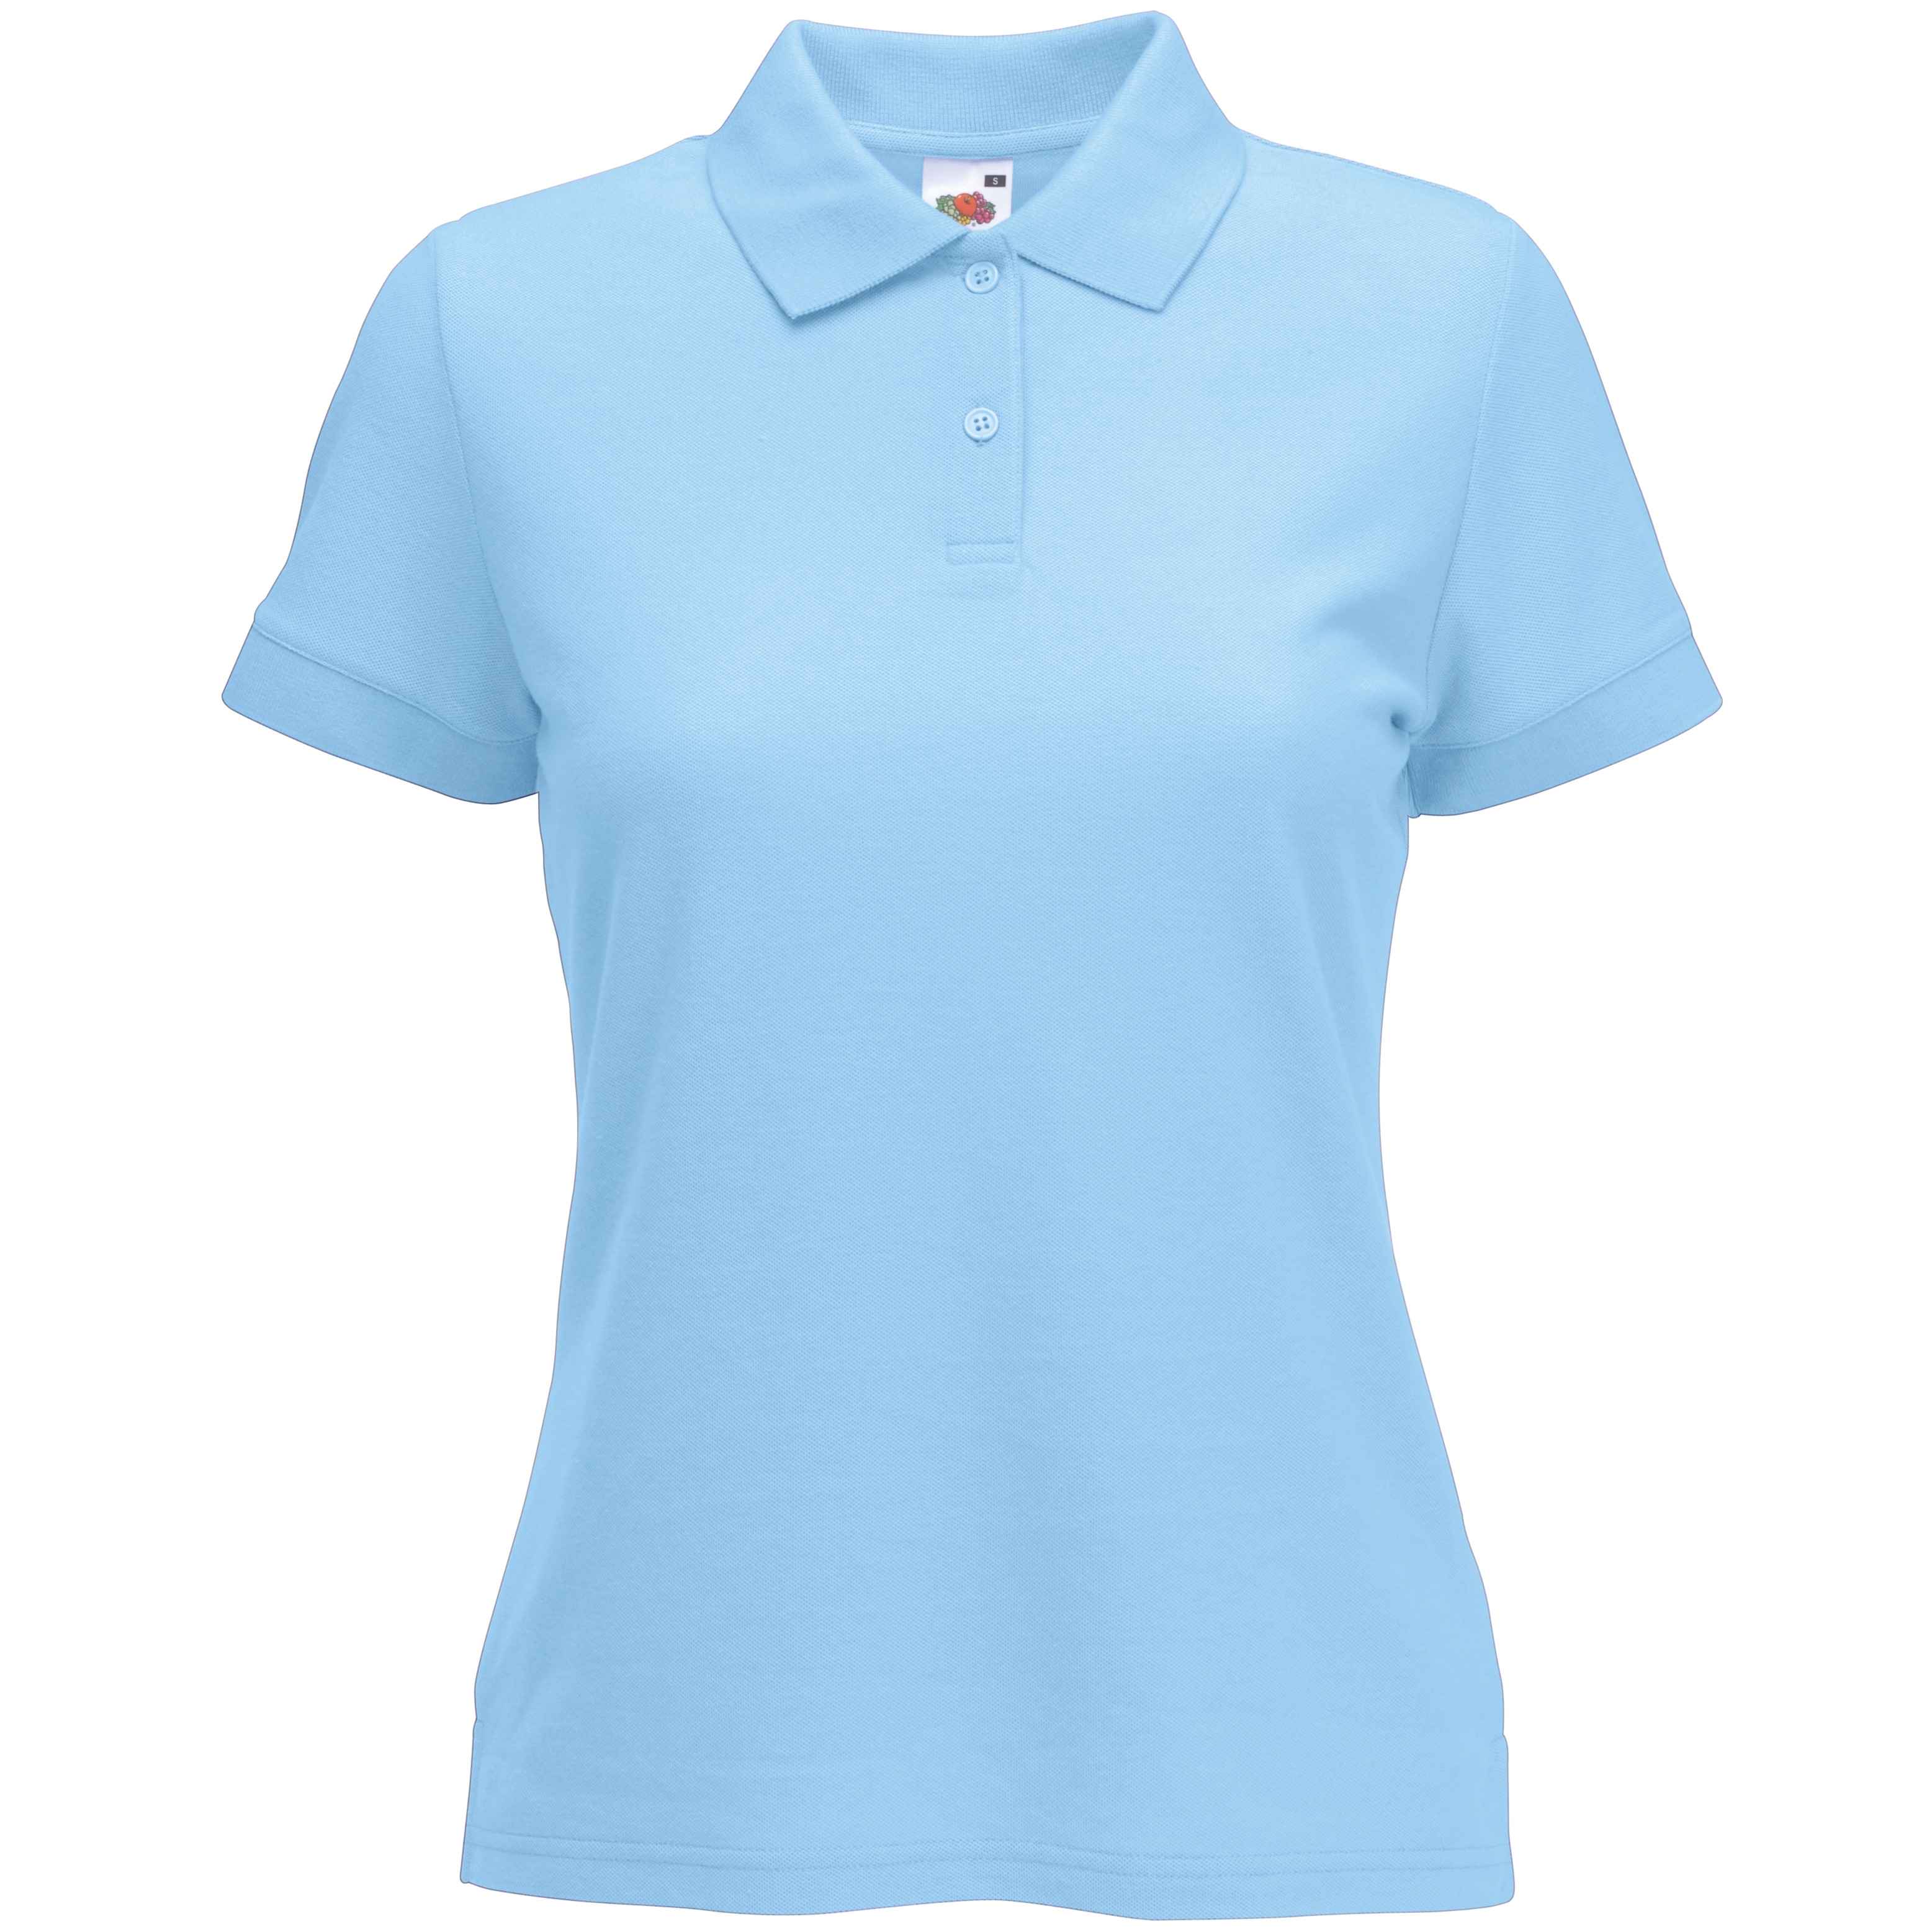 ax-httpswebsystems.s3.amazonaws.comtmp_for_downloadfruit-of-the-loom-ladies-65-35-polo-sky-blue.jpg